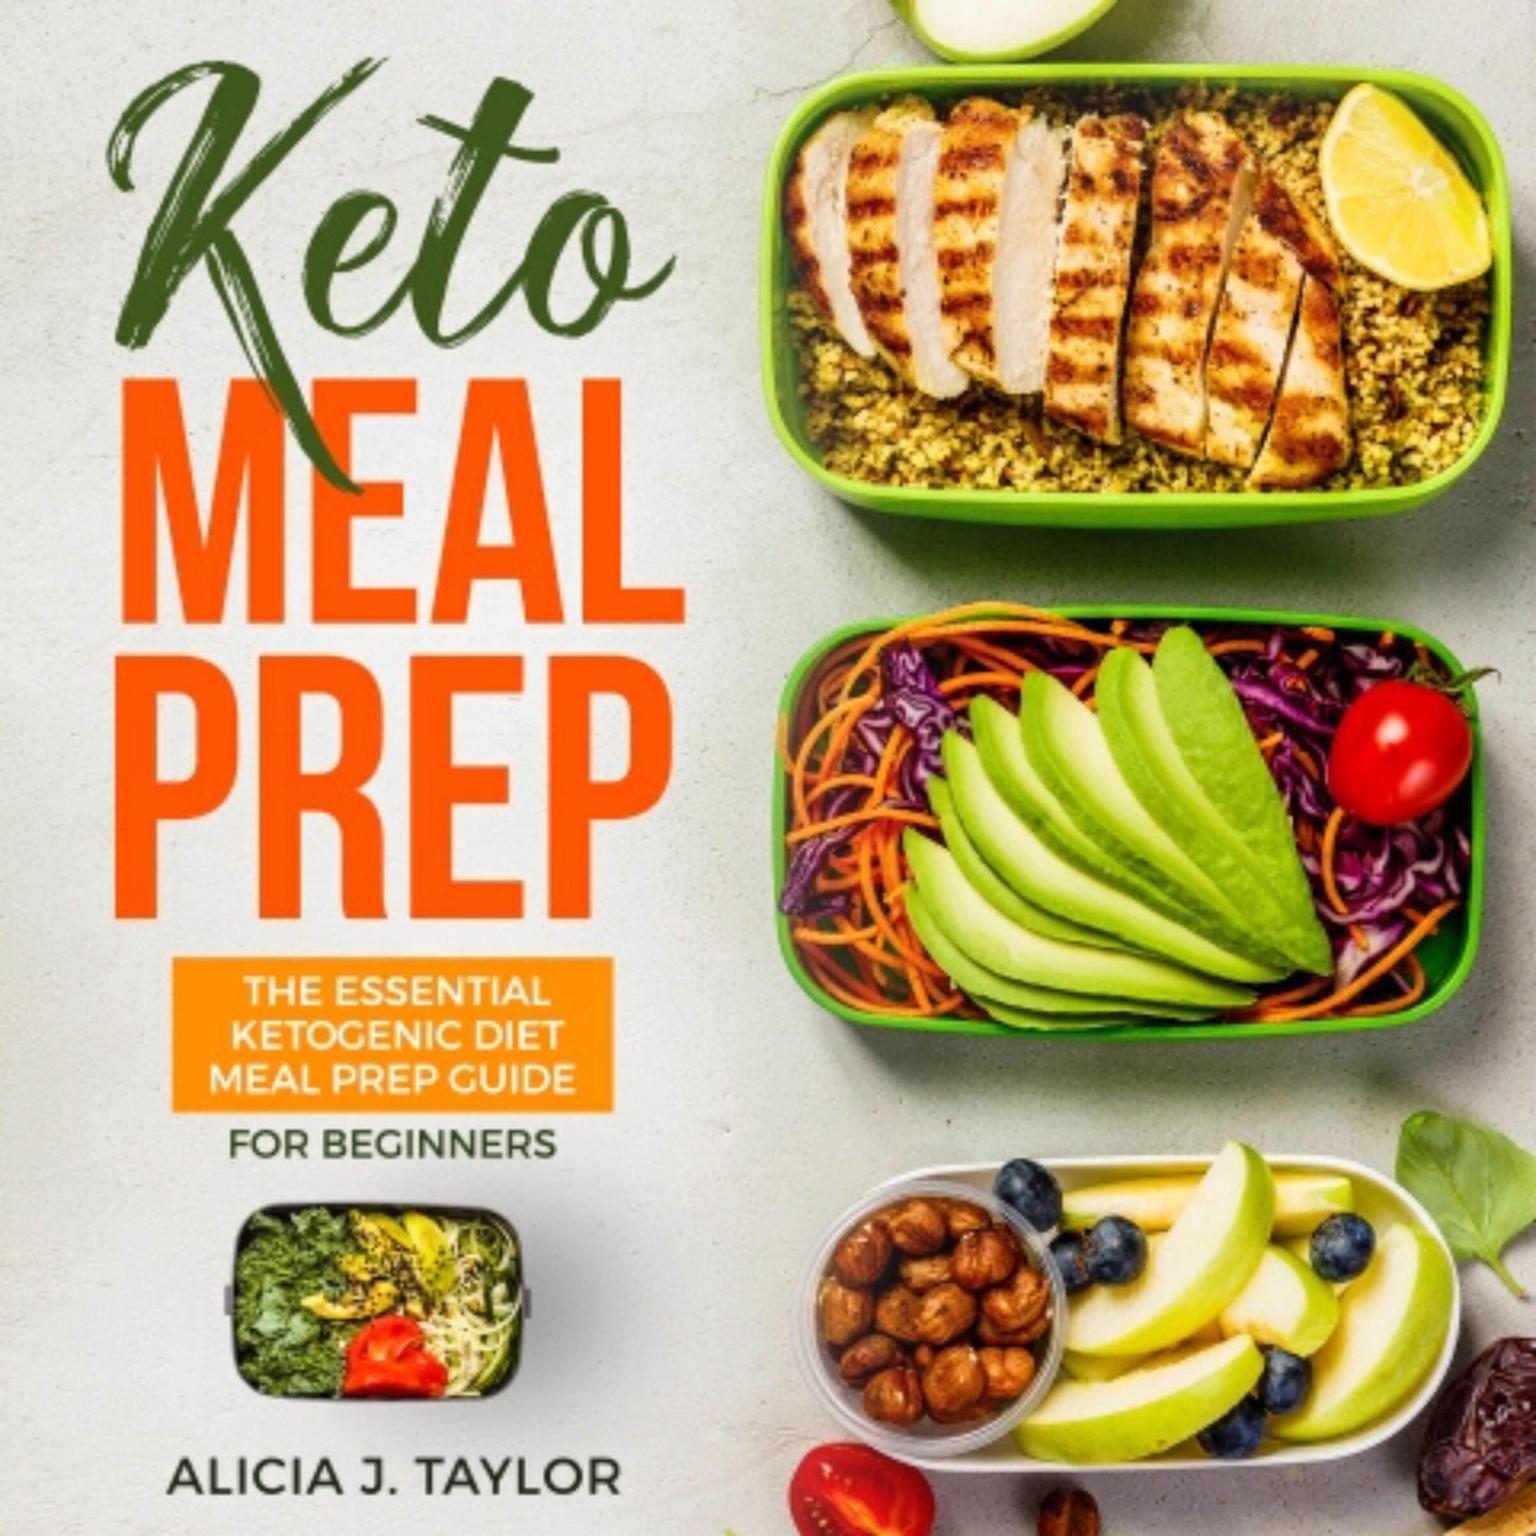 Keto Meal Prep: The Essential Ketogenic Meal Prep Guide For Beginners—30 Days Keto Meal Prep Meal Plan. The Low Carb Diet Cookbook You need in 2018 for weight loss and healthy eating Audiobook, by Alicia J. Taylor